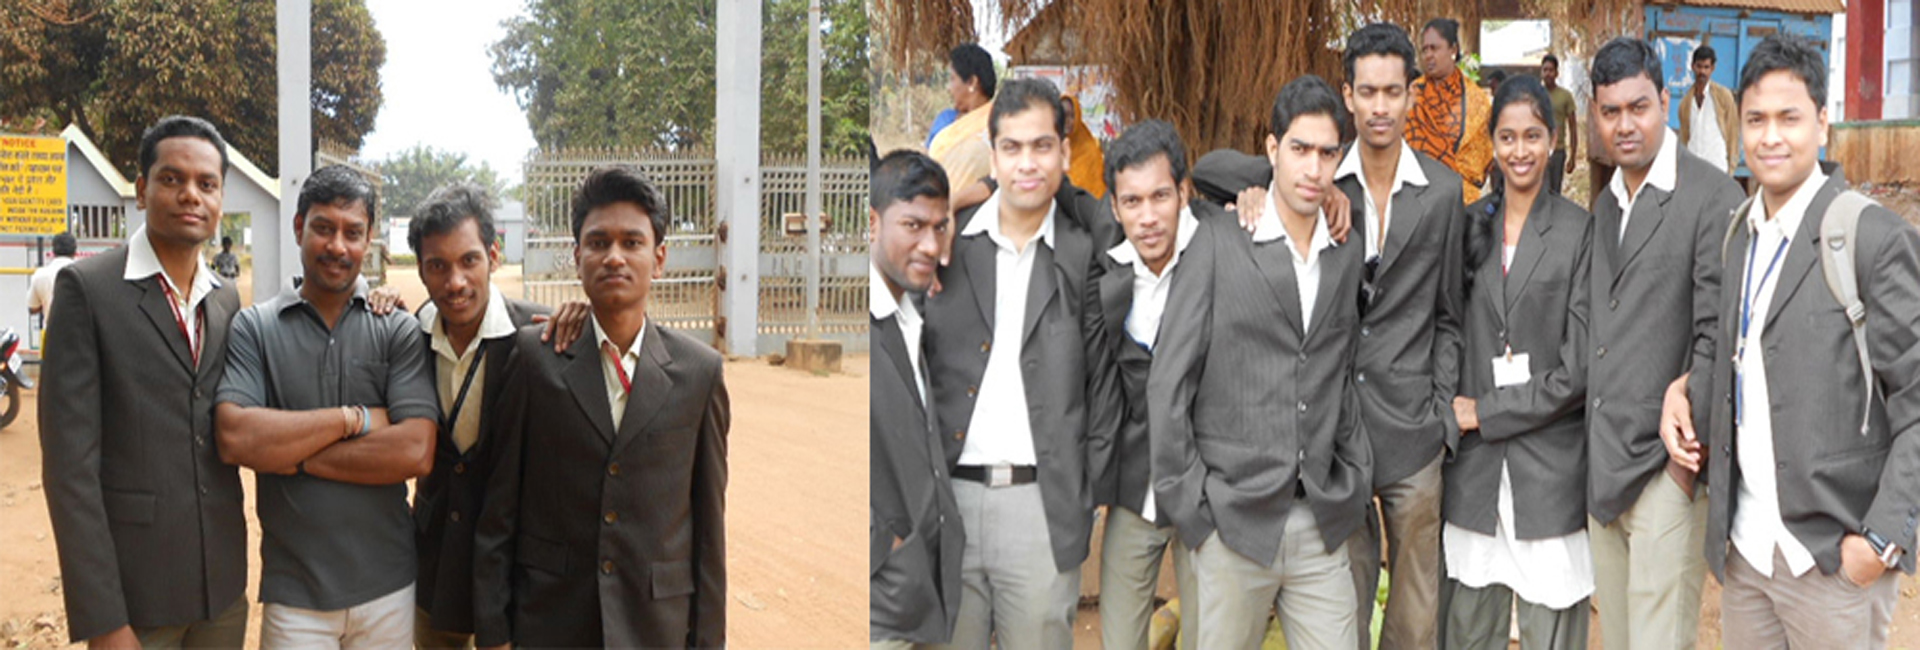 Berhampur School of Engineering & Technology (BSET) Sports Day Ceremony